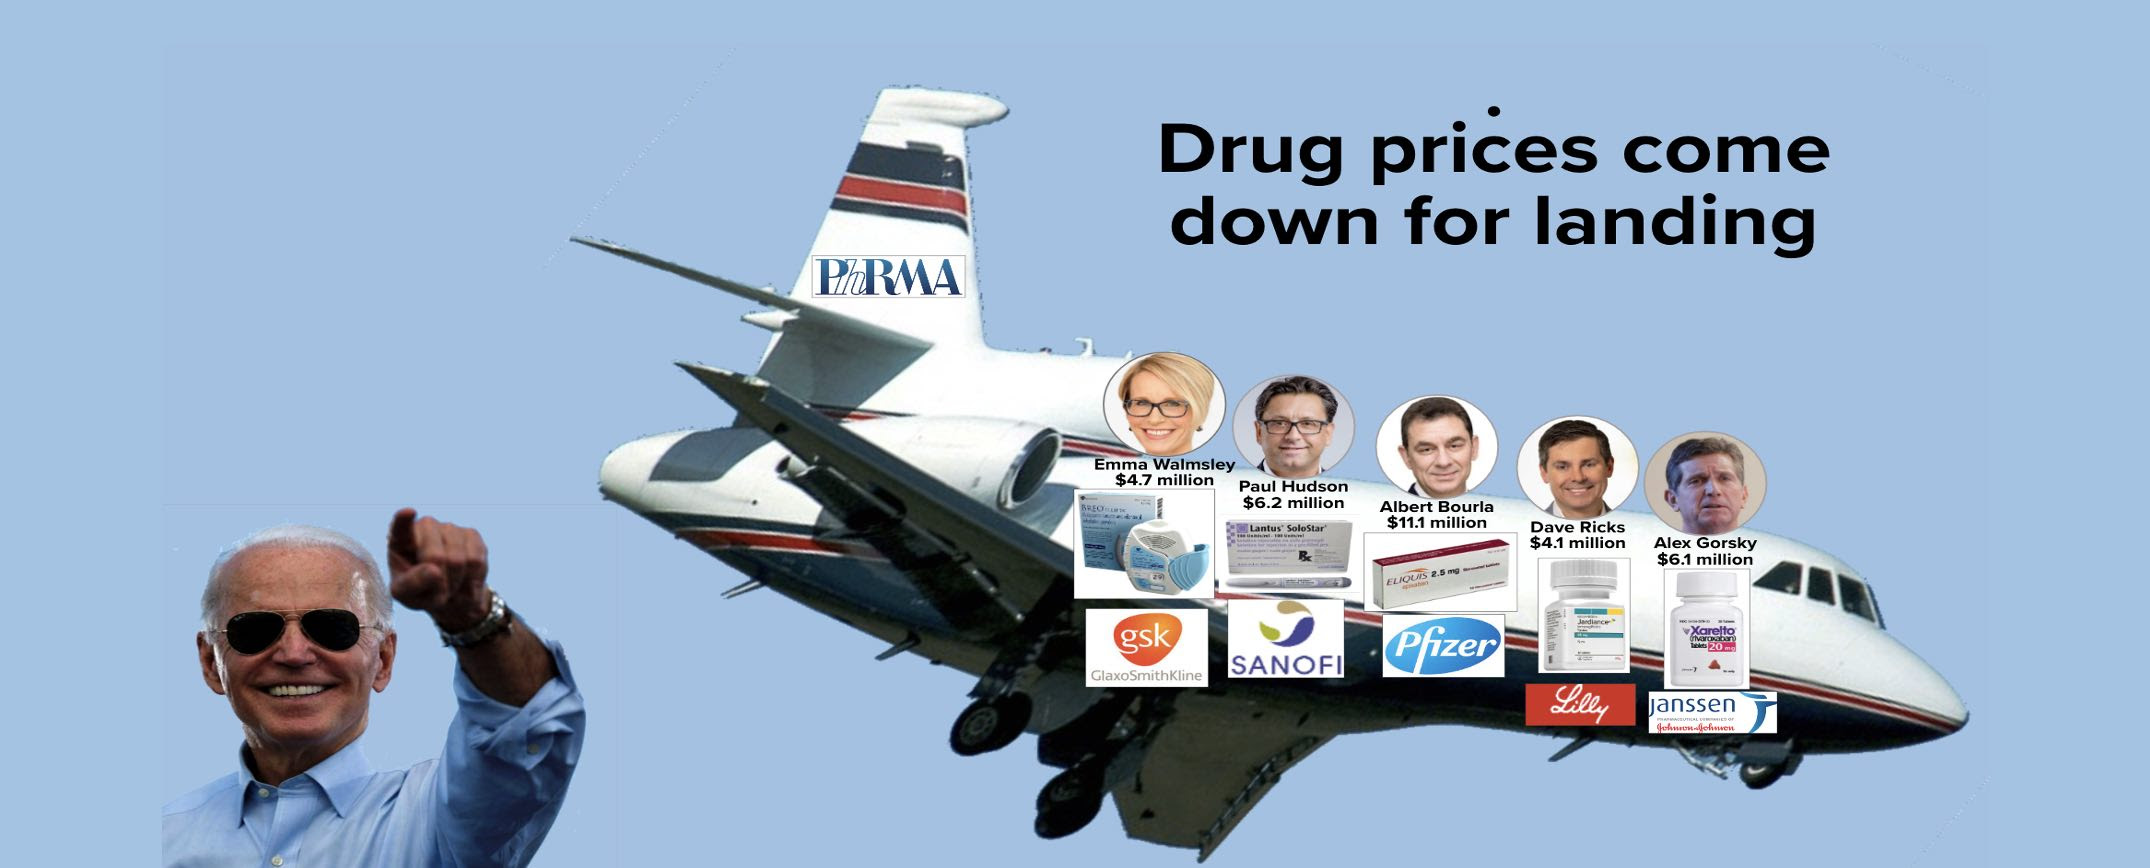 The Inflation Reduction Act lets Medicare negotiate lower prices for high-cost drugs for the first time. Companies that refuse to negotiate will be subject to an up to 95% sales tax on that drug. The bill includes a ceiling on the negotiated price of the specified drug. This is a policy Democrats have attempted to enact, over objections from the pharmaceutical industry, for many years. The provisions are expected to save $288 billion over 10 years according to analysis by the CBO.